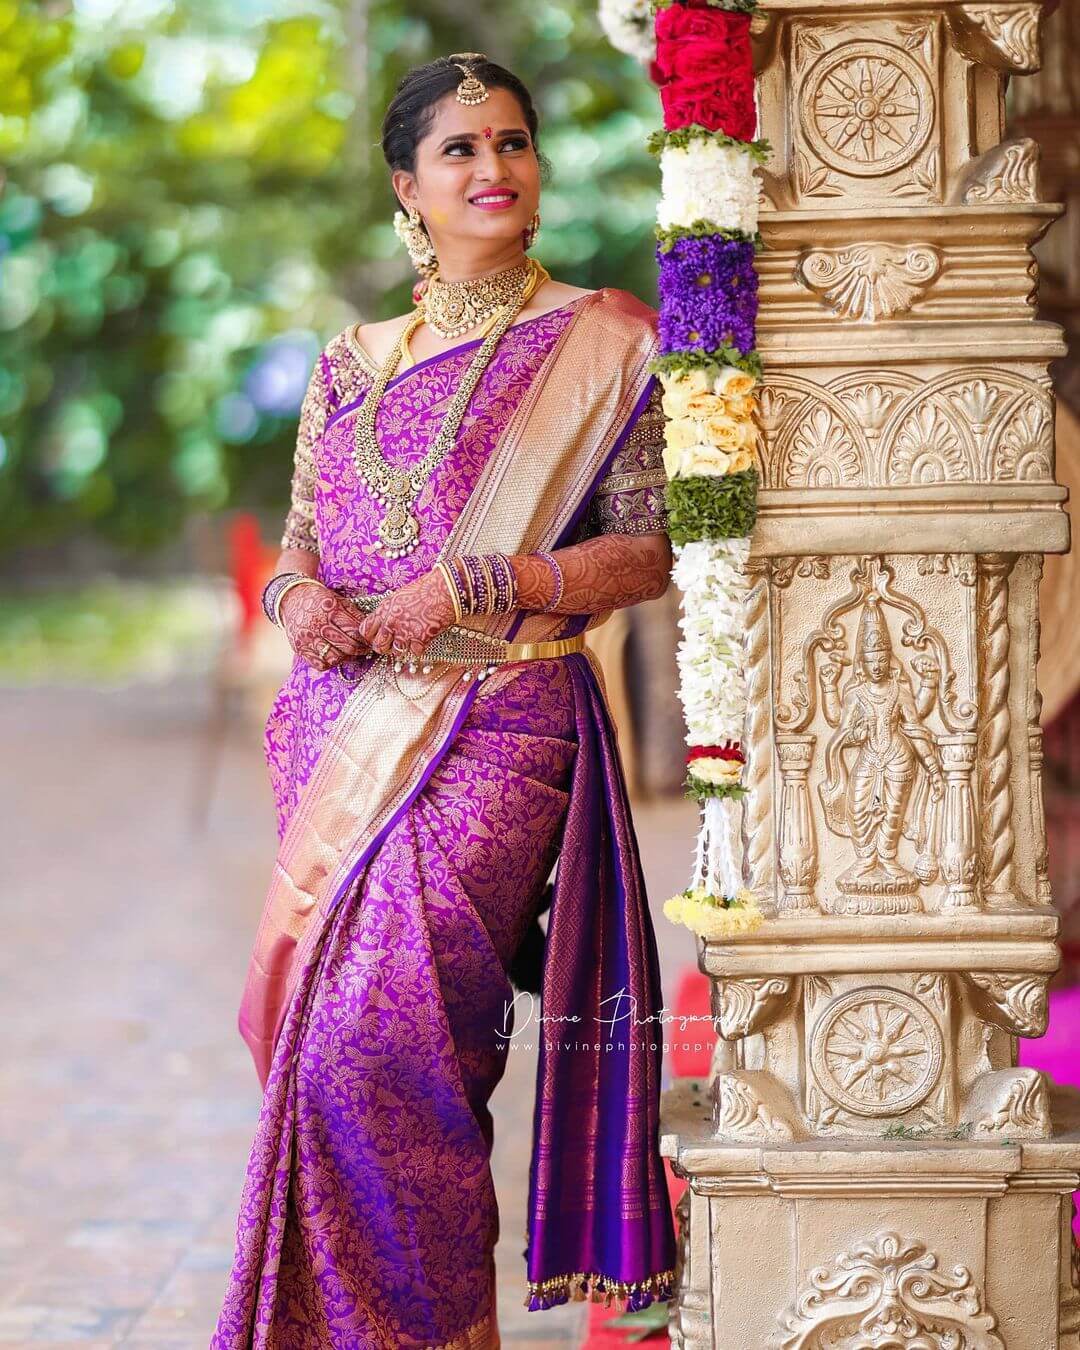 South Indian Wedding Saree for Traditional Bride Violet with gold magic in the saree